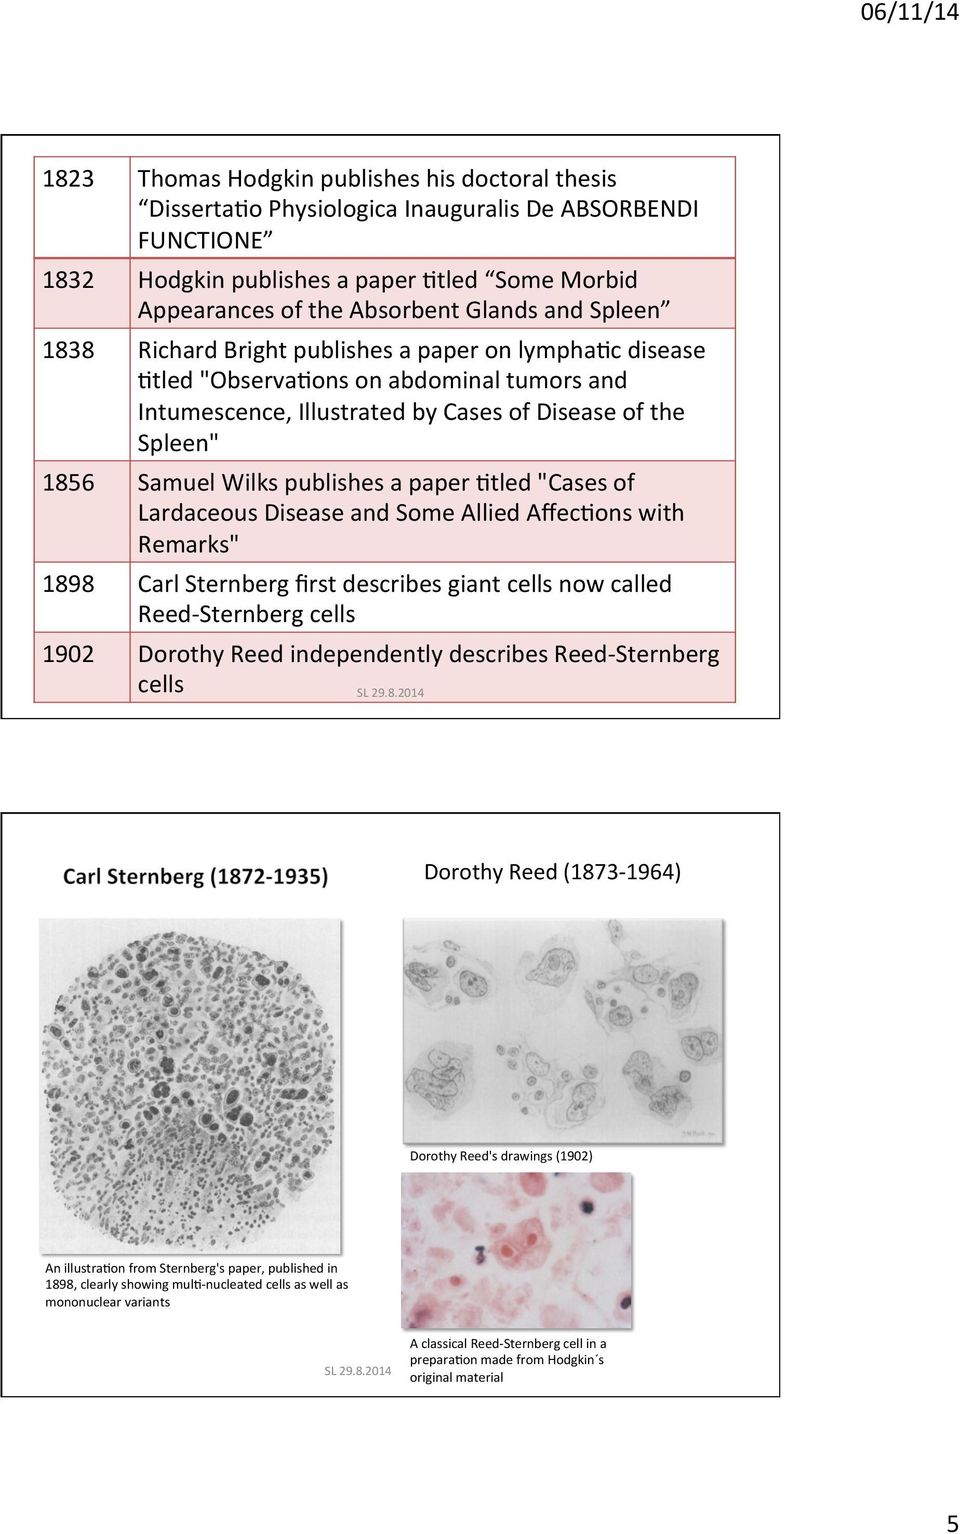 paper _tled "Cases of Lardaceous Disease and Some Allied Affec_ons with Remarks" 1898 Carl Sternberg first describes giant cells now called Reed- Sternberg cells 1902 Dorothy Reed independently